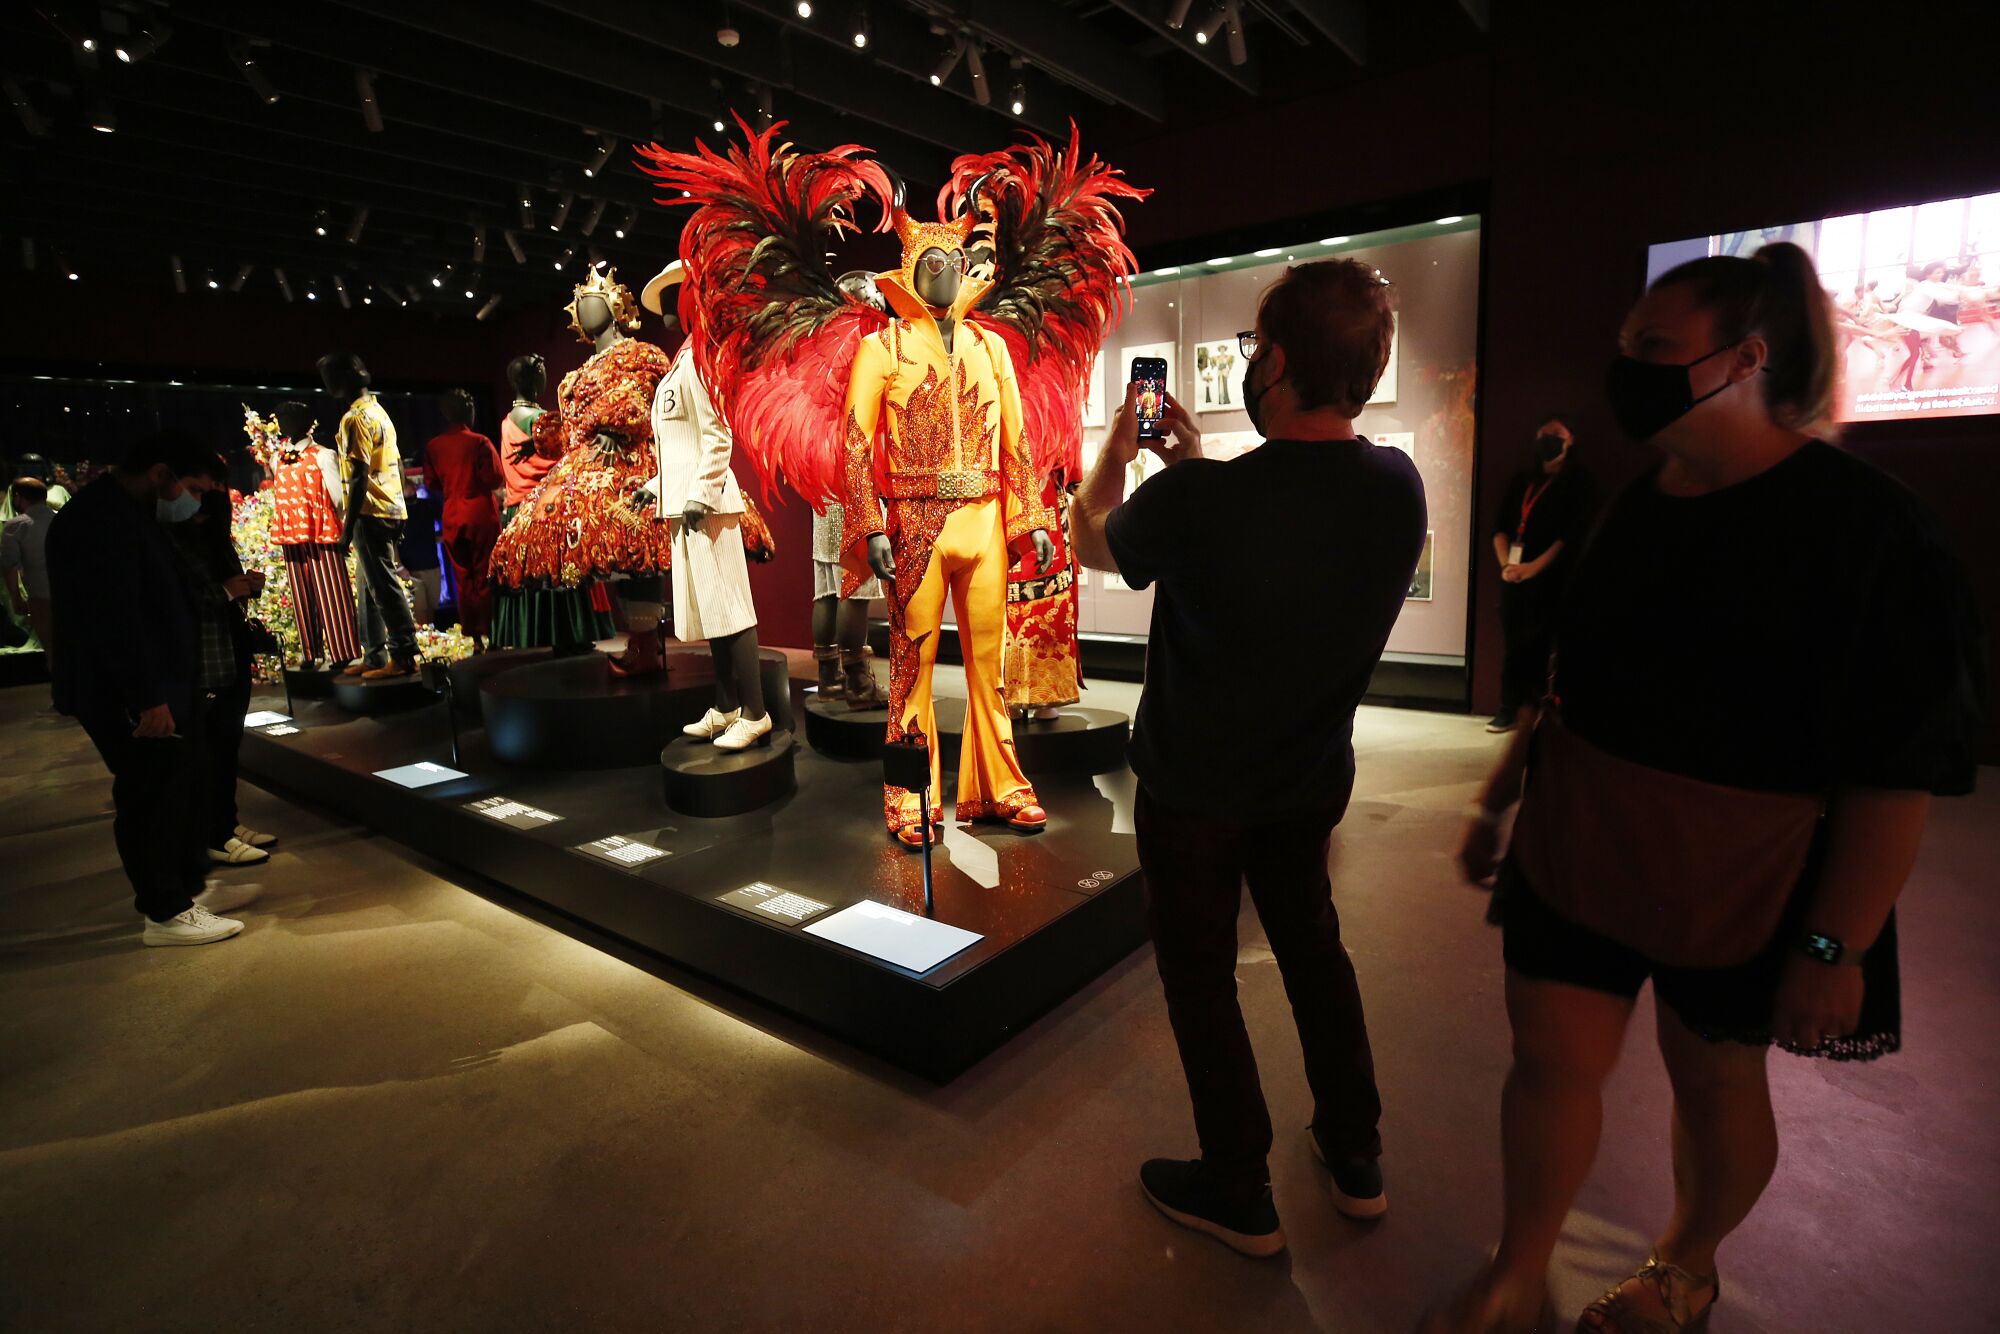 Guests take photos in the costume exhibit at the Academy Museum of Motion Pictures.